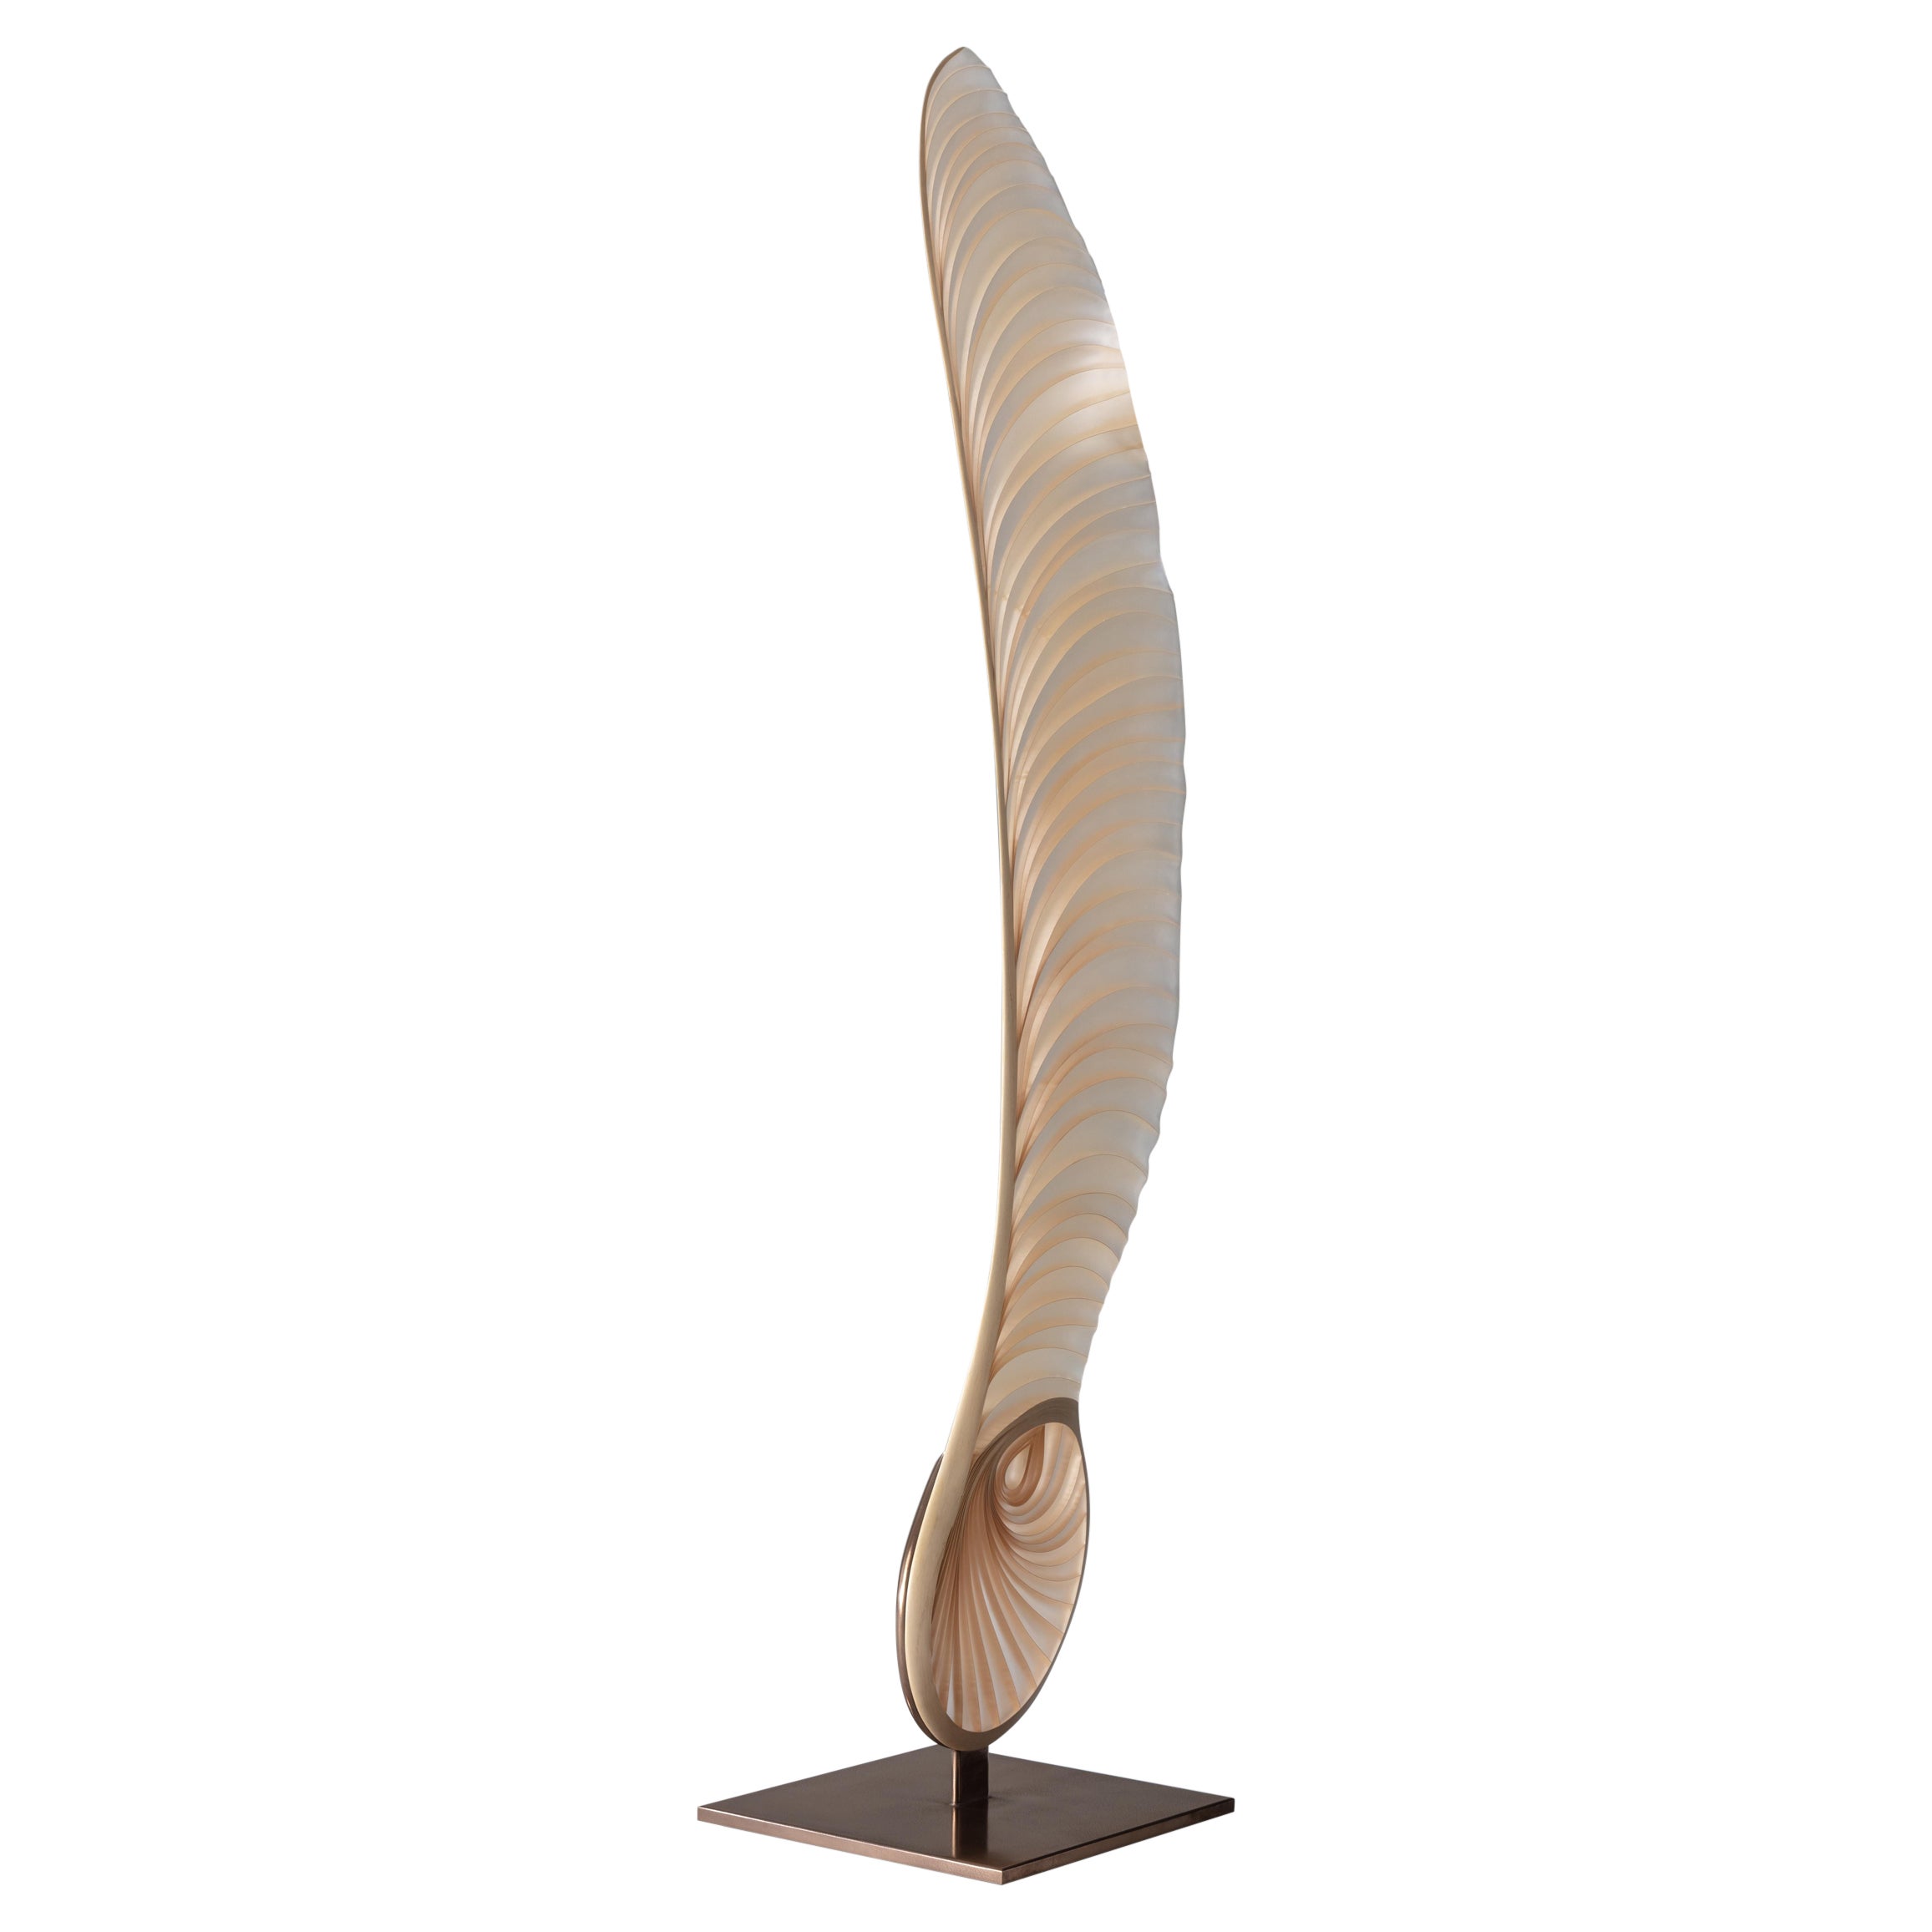 Marc Fish Ethereal Sculptural Sycamore Seed UK 2022